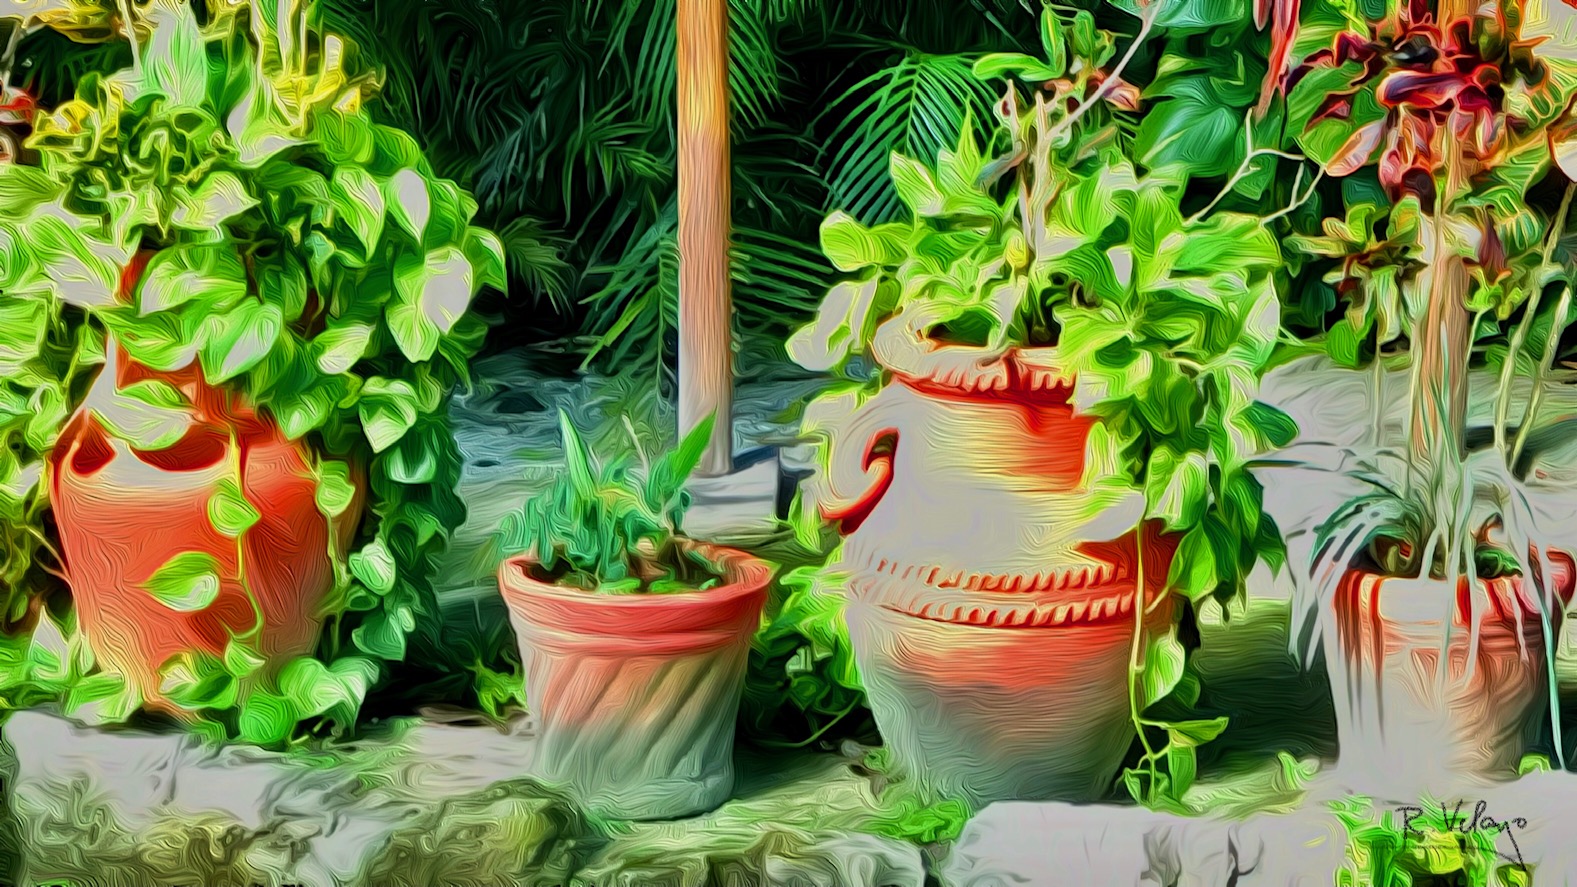 "POTTED PLANTS AT THE MAYAN CACAO COMPANY IN COZUMEL" [Created: 4/02/2021]